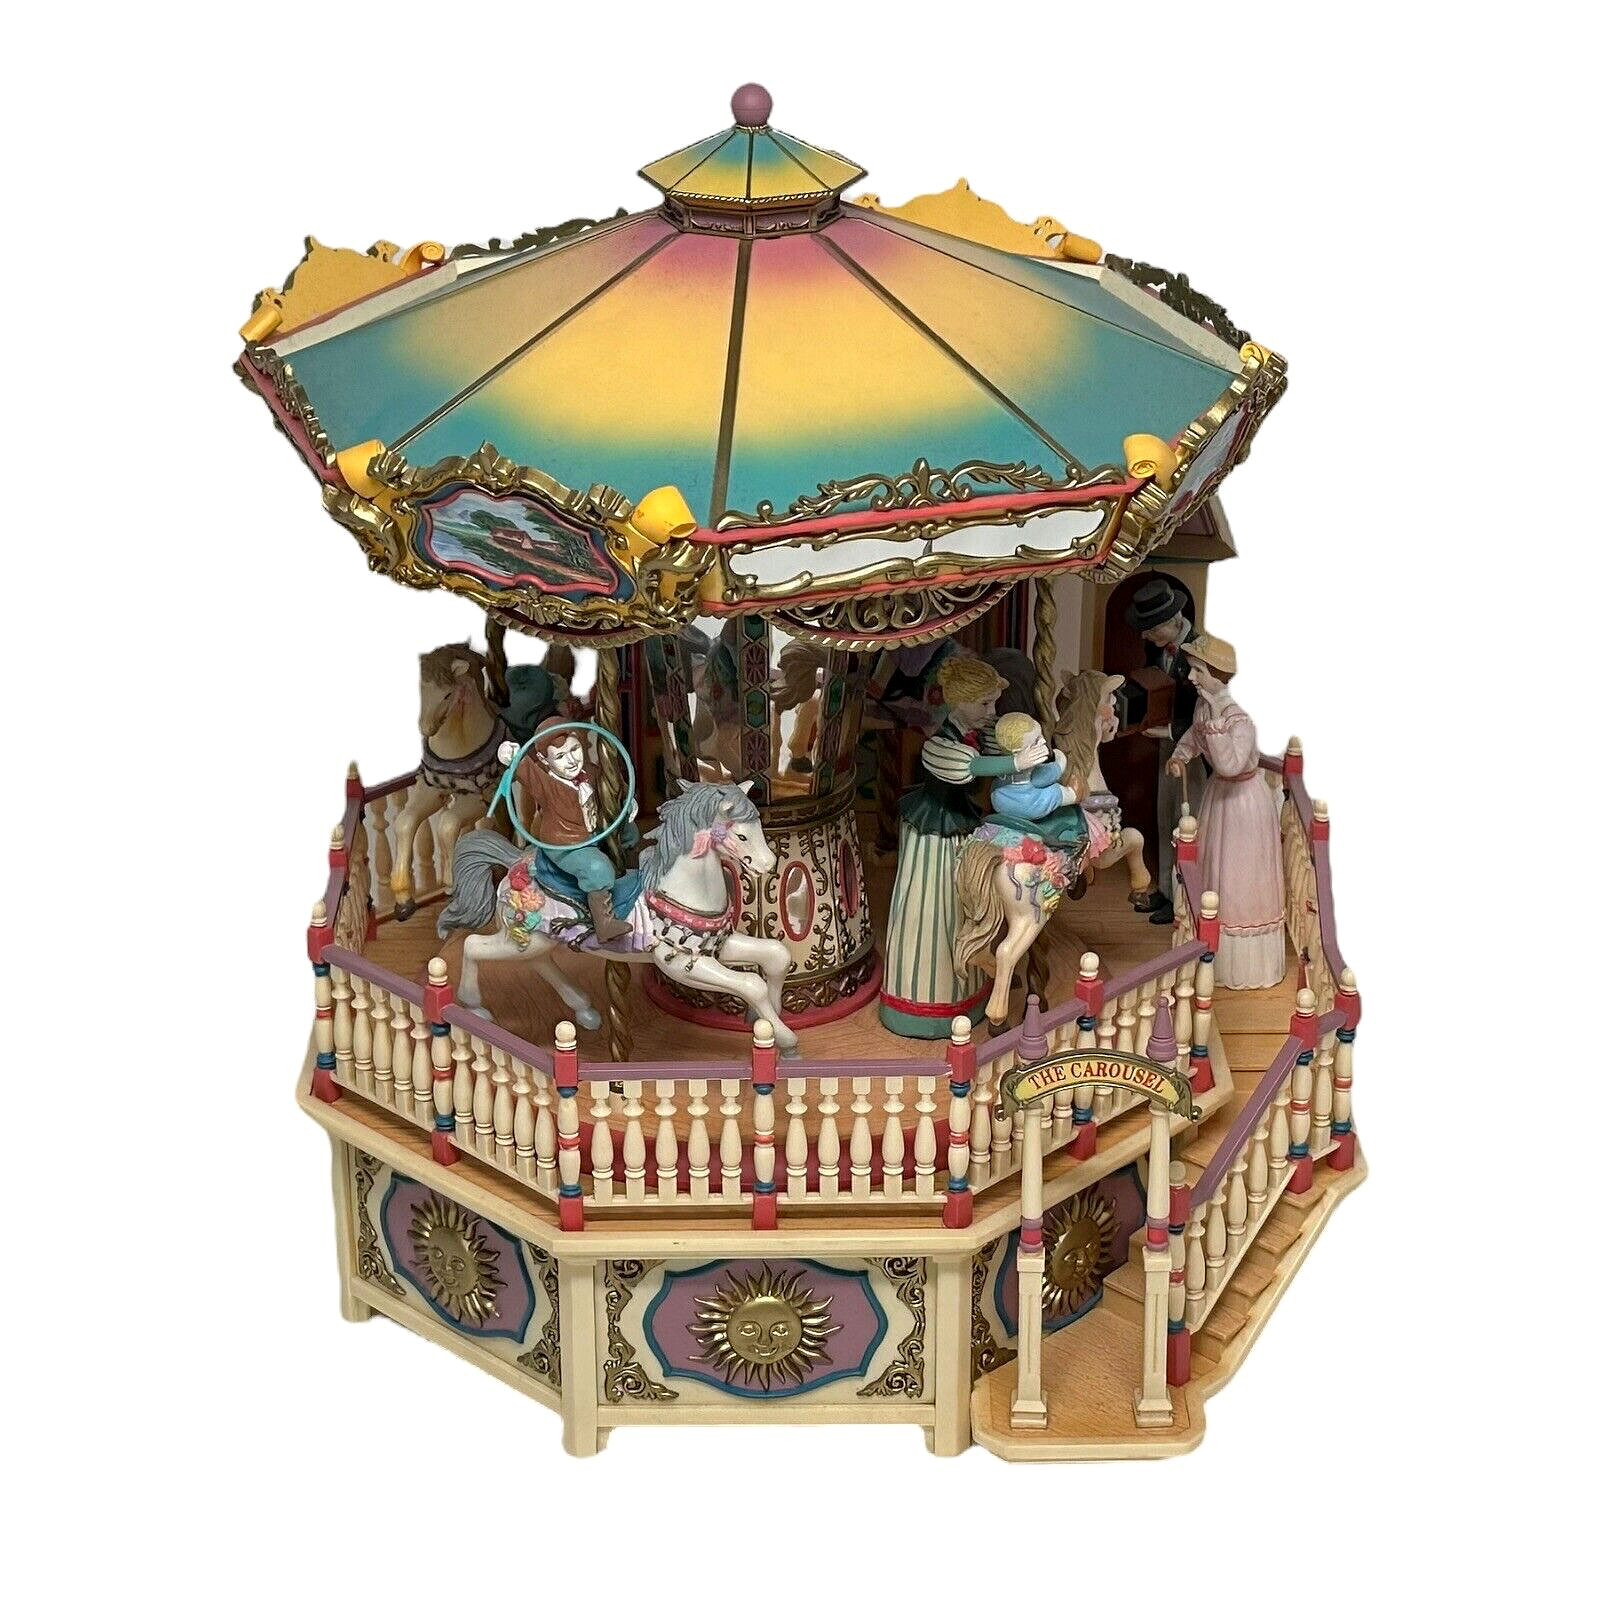 ENESCO CAROUSEL ROYALE DELUXE ACTION & ILLUSTRATED MUSICAL w/ ORIGINAL BOX